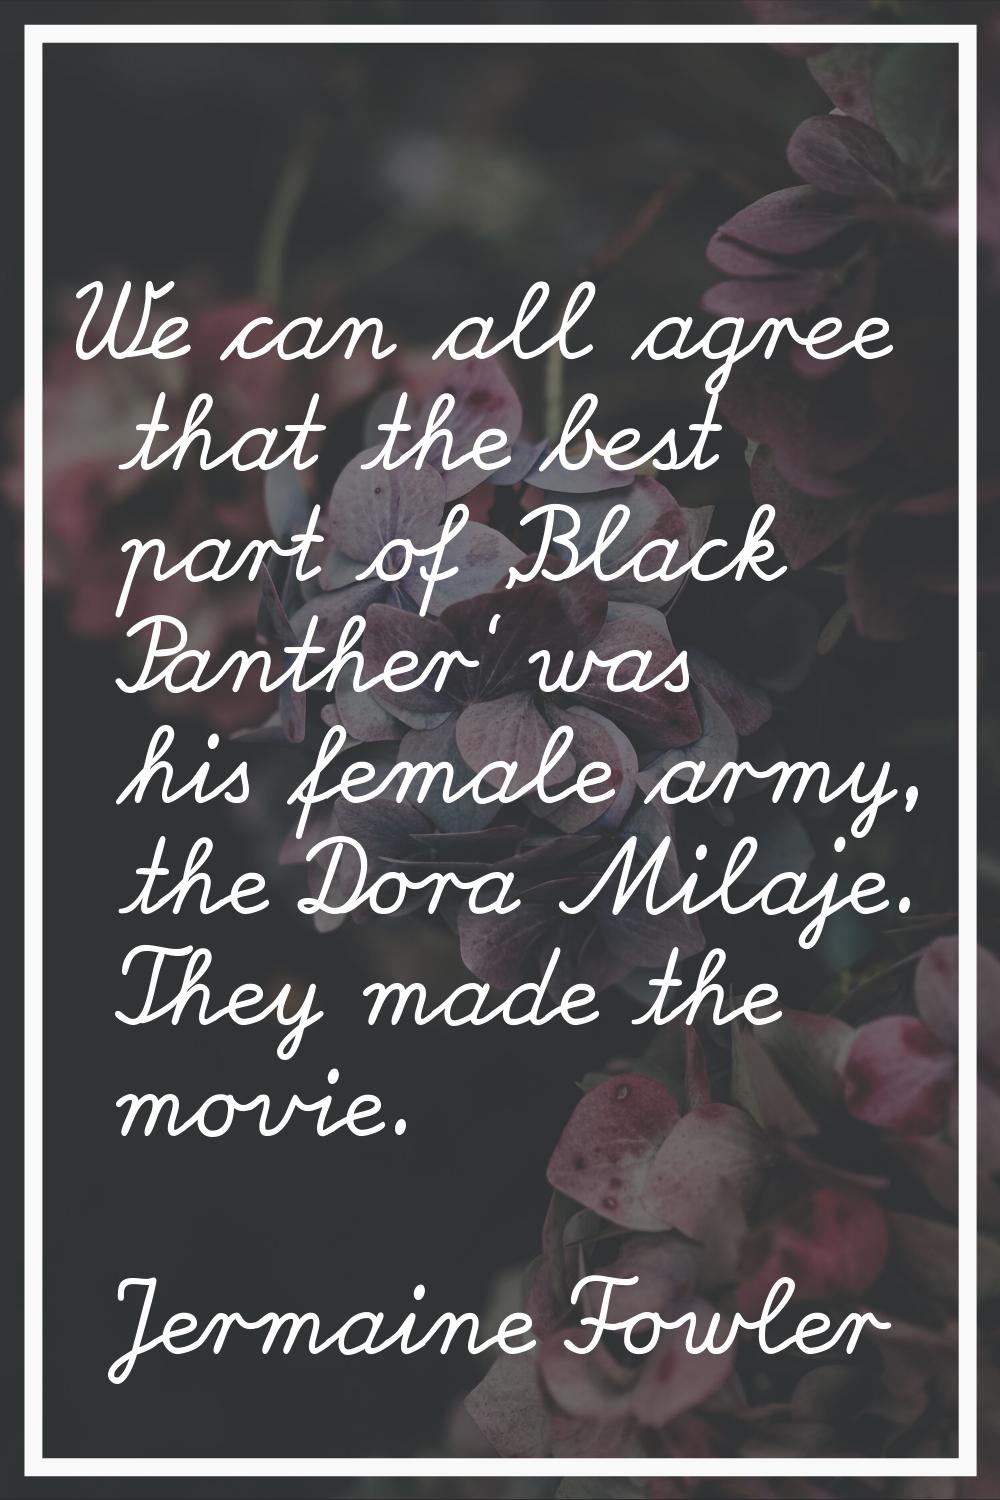 We can all agree that the best part of 'Black Panther' was his female army, the Dora Milaje. They m